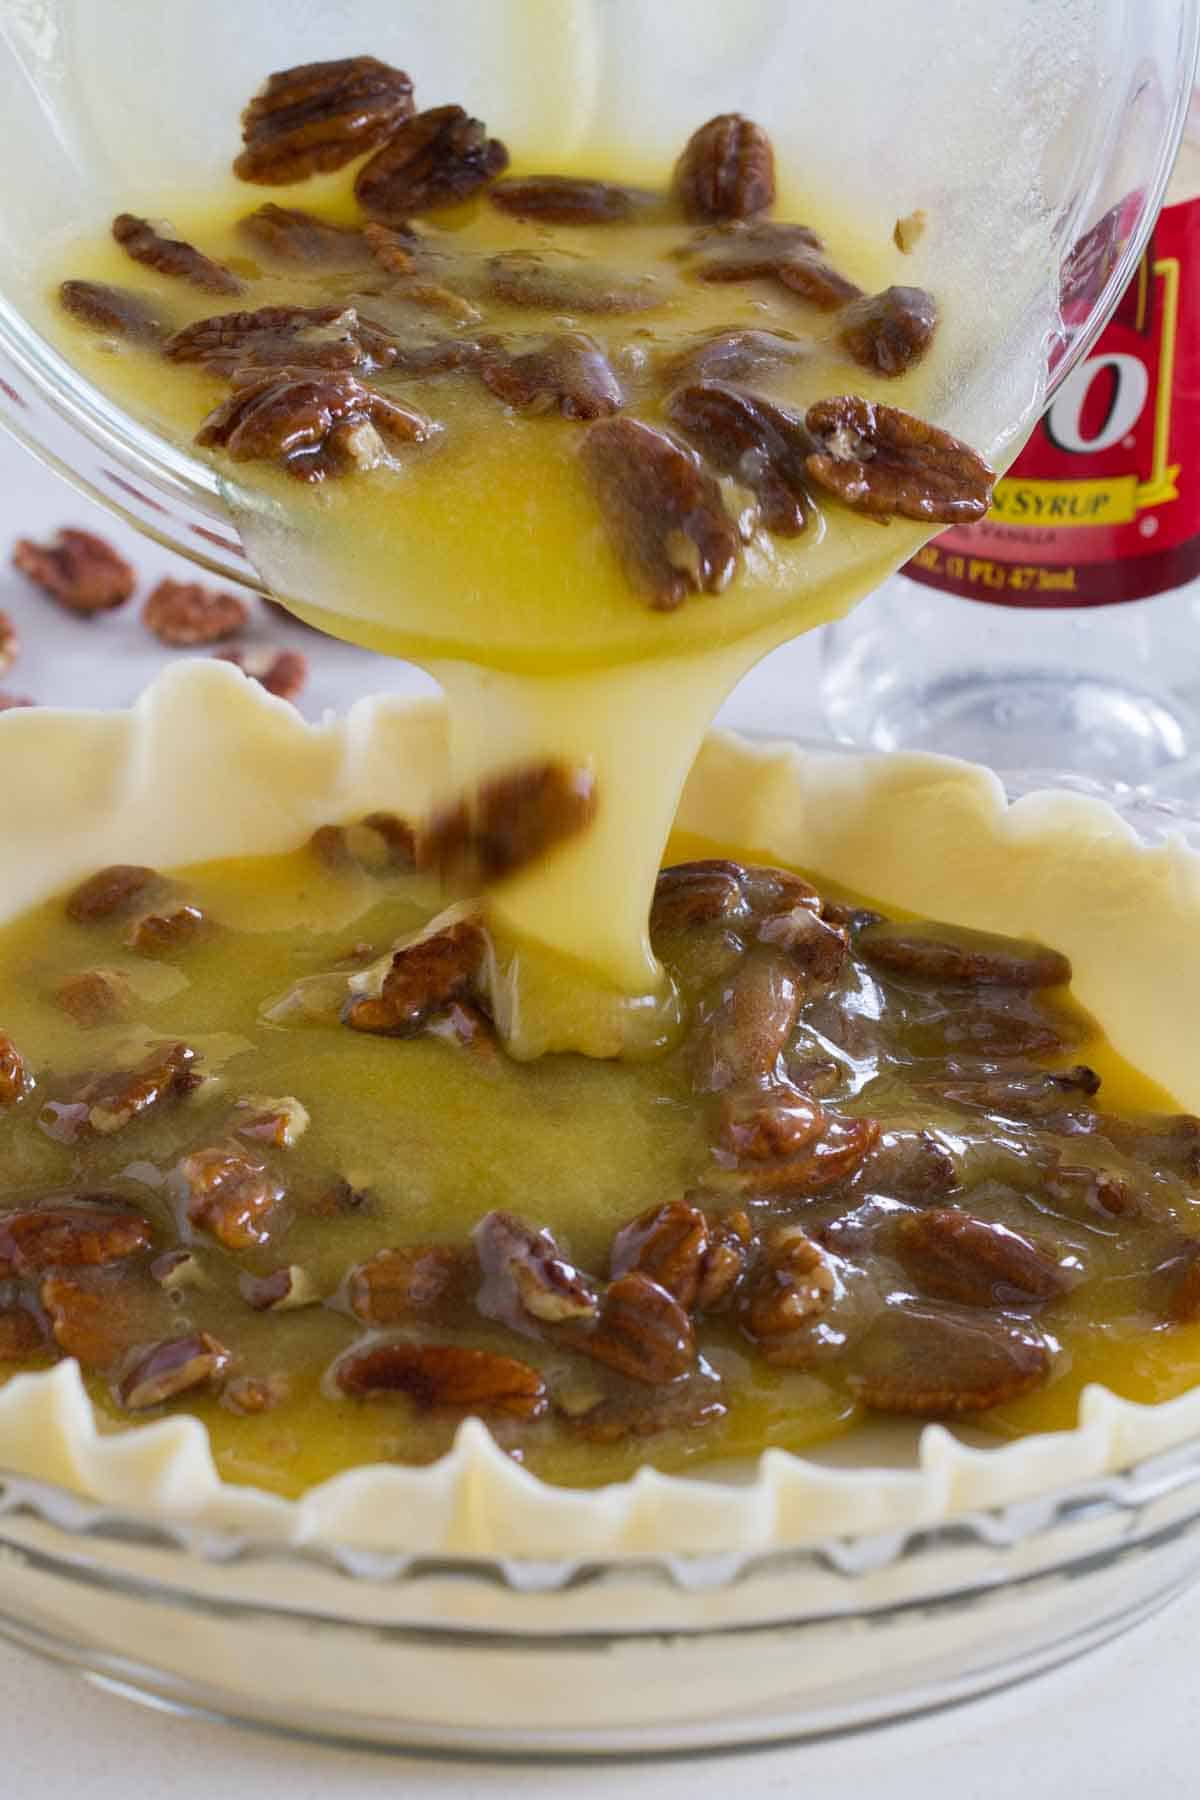 Pouring filling into a pecan pie.